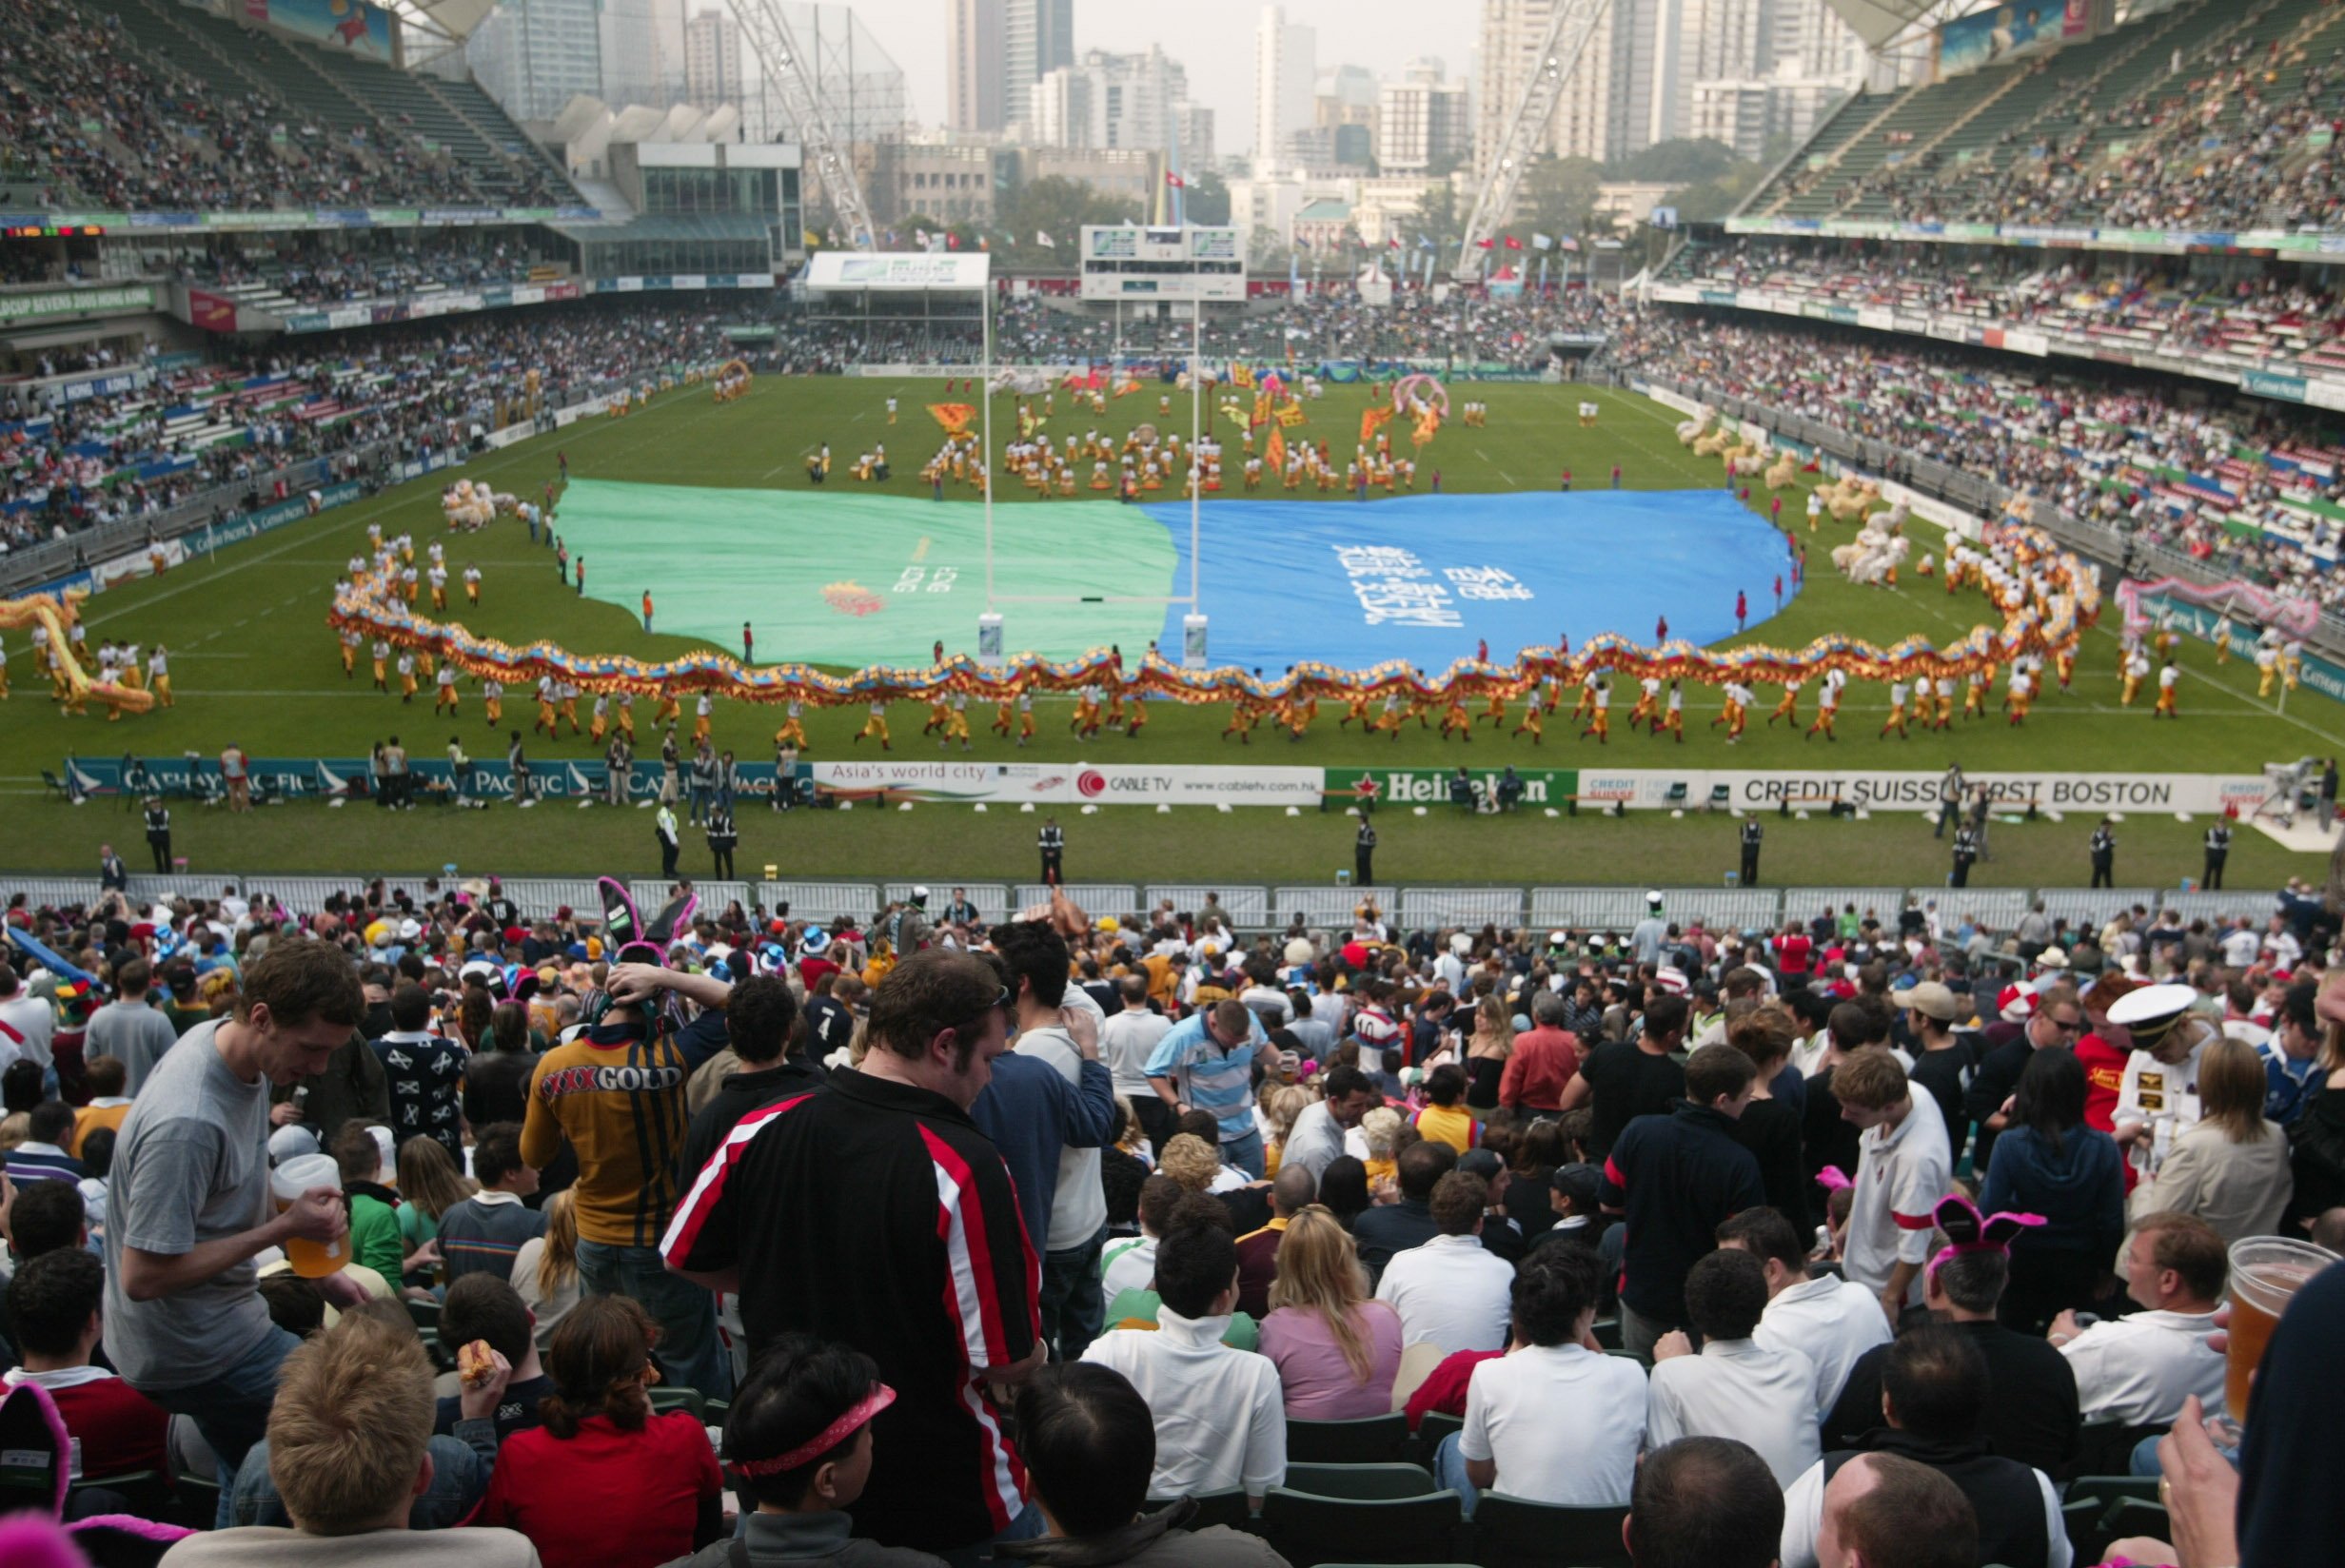 Hong Kong hosted the World Cup Sevens in 1997 and again in 2005. Photo: Antony Dickson